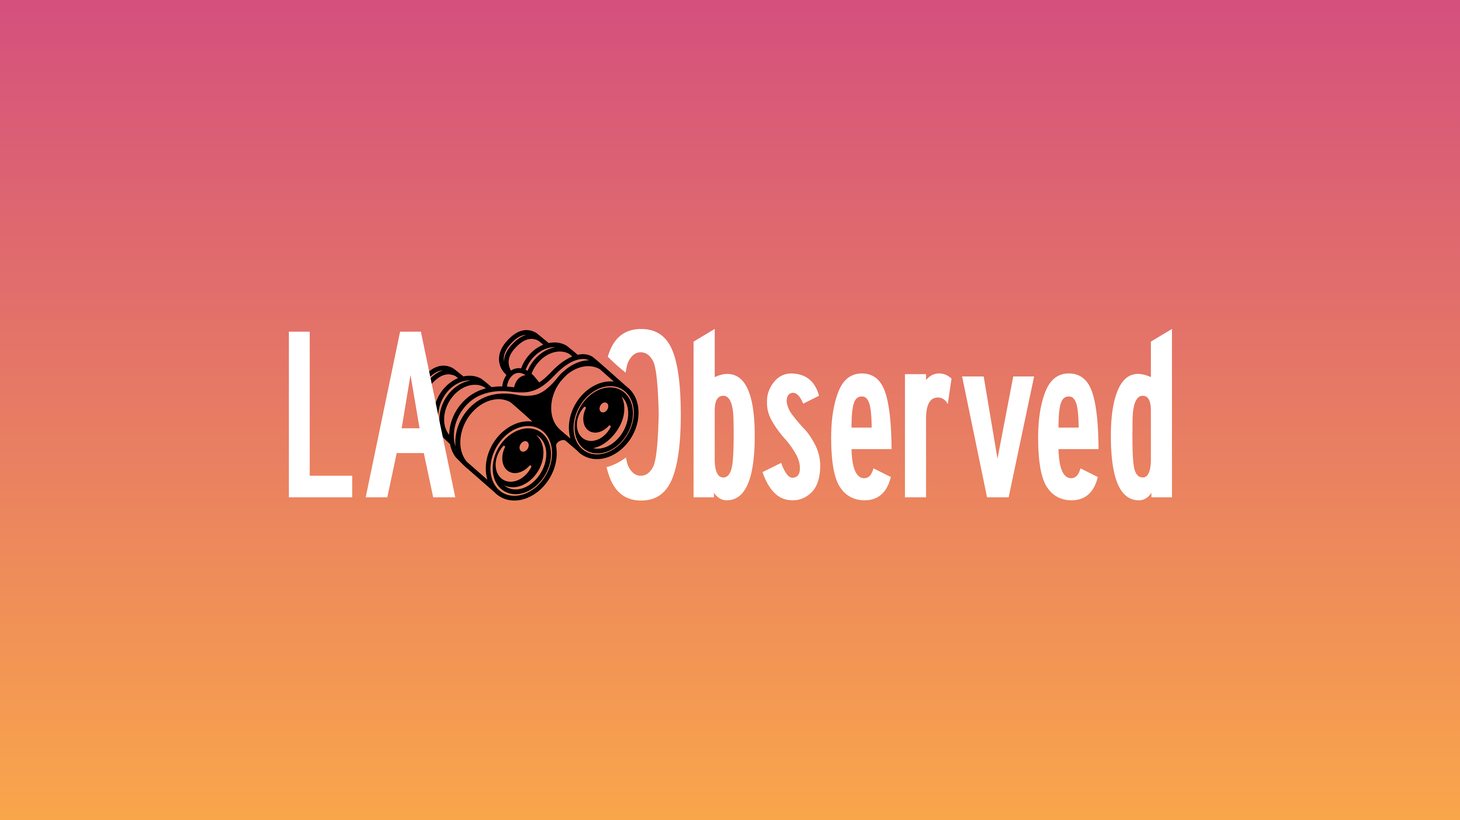 One of the services we like to provide at LA Observed is to take listeners and readers behind the scenes in Los Angeles, to give a glimpse, where we can, inside the doors that usually stay closed to most of us. Today we're going inside a true bastion of old-school Los Angeles privilege and power...